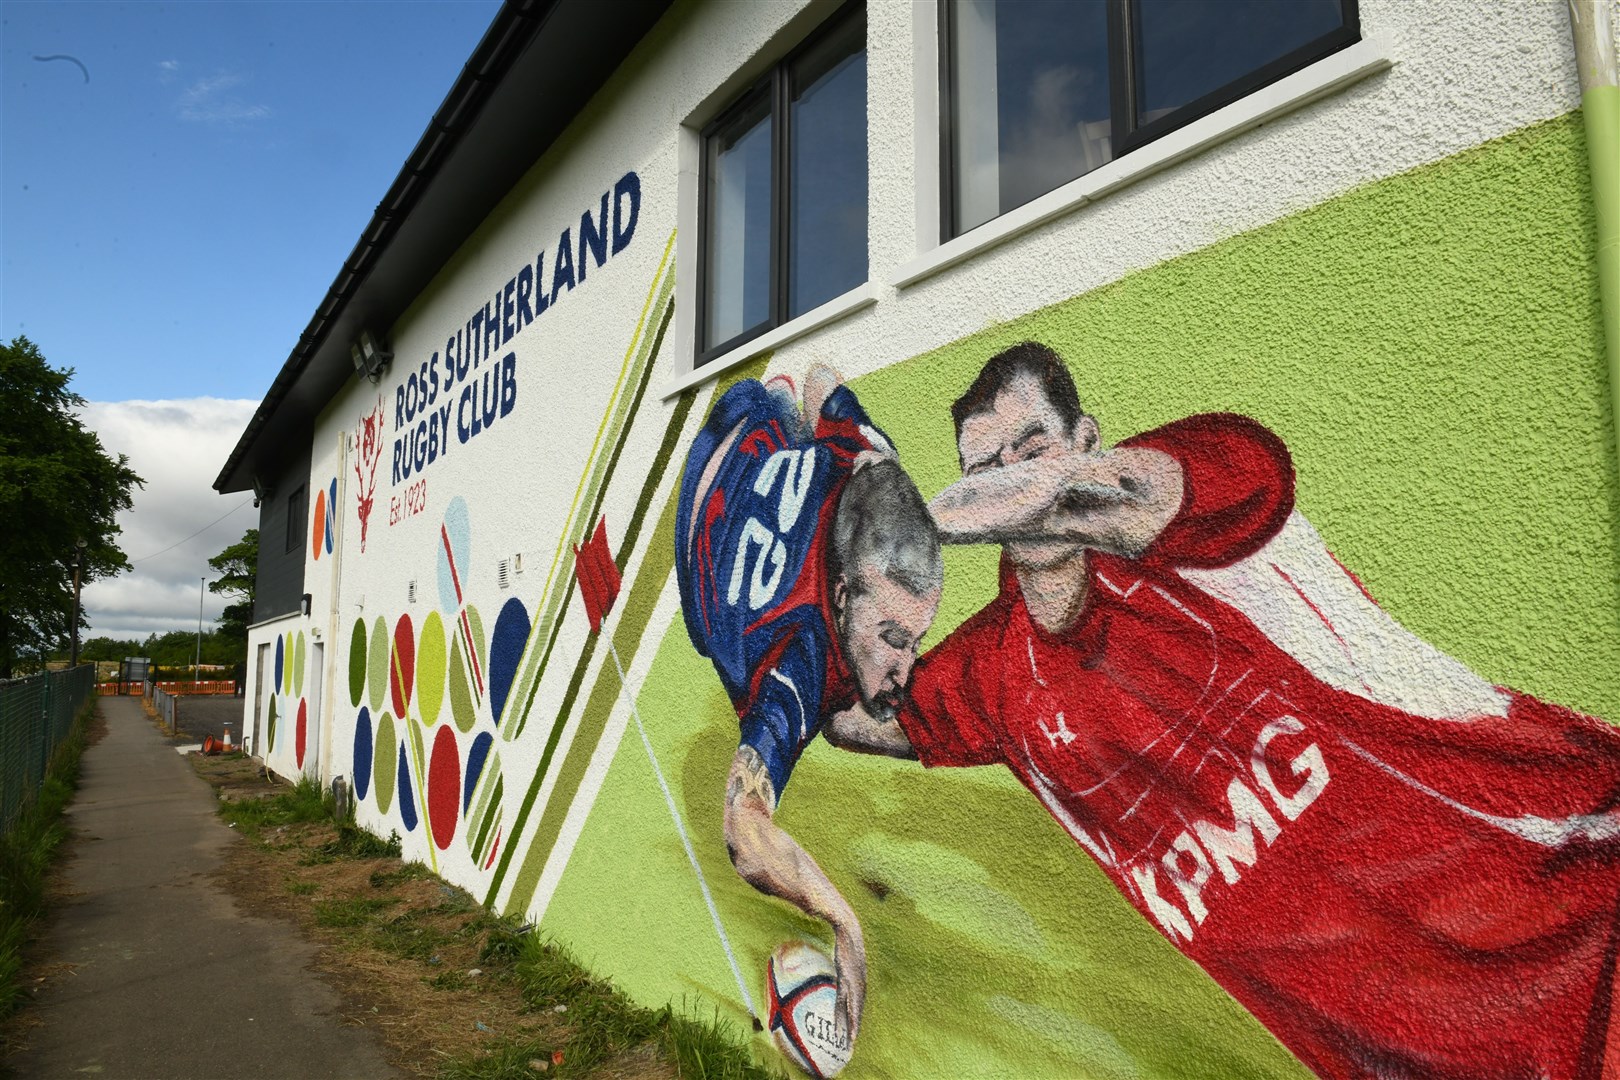 A close-up view of John Reid's iconic try on the side of Ross Sutherland's clubhouse. Picture: James Mackenzie